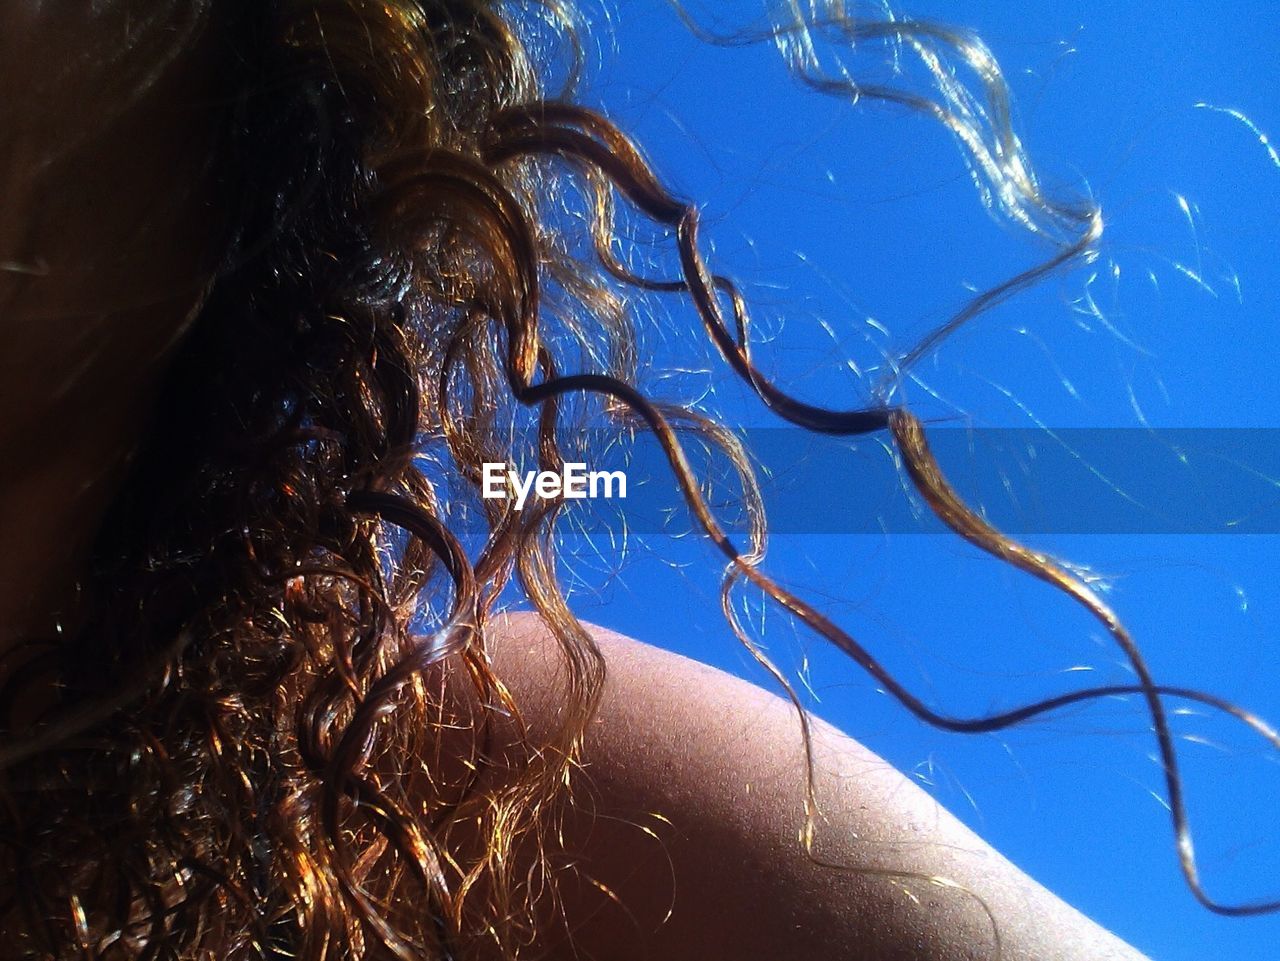 Cropped image of woman with curly hair against clear blue sky